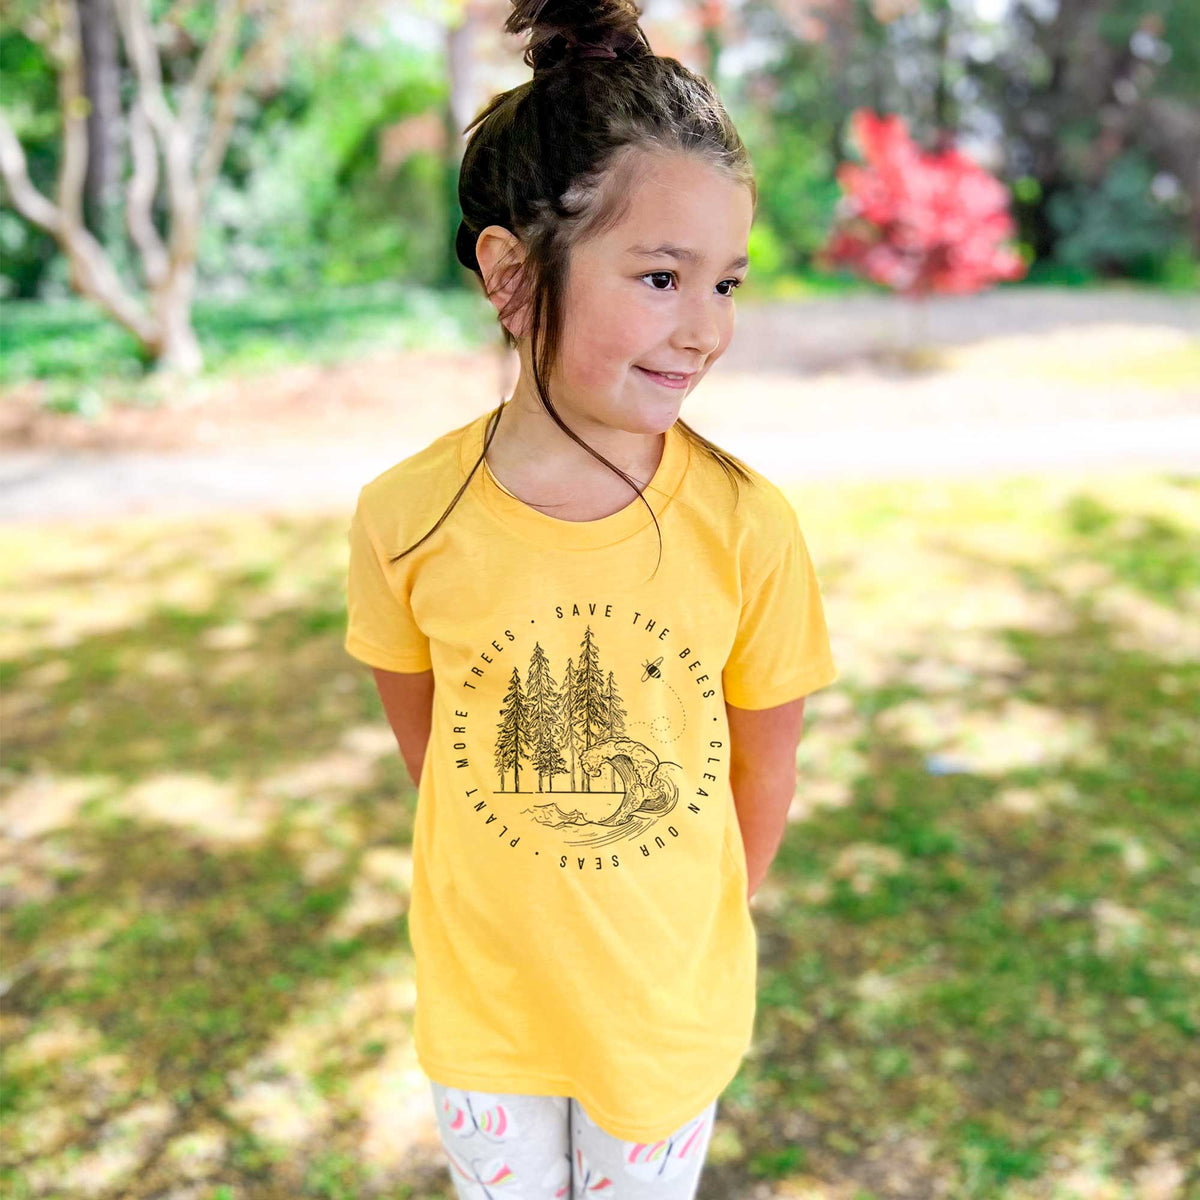 Save the Bees, Clean our Seas, Plant more Trees - Kids Shirt